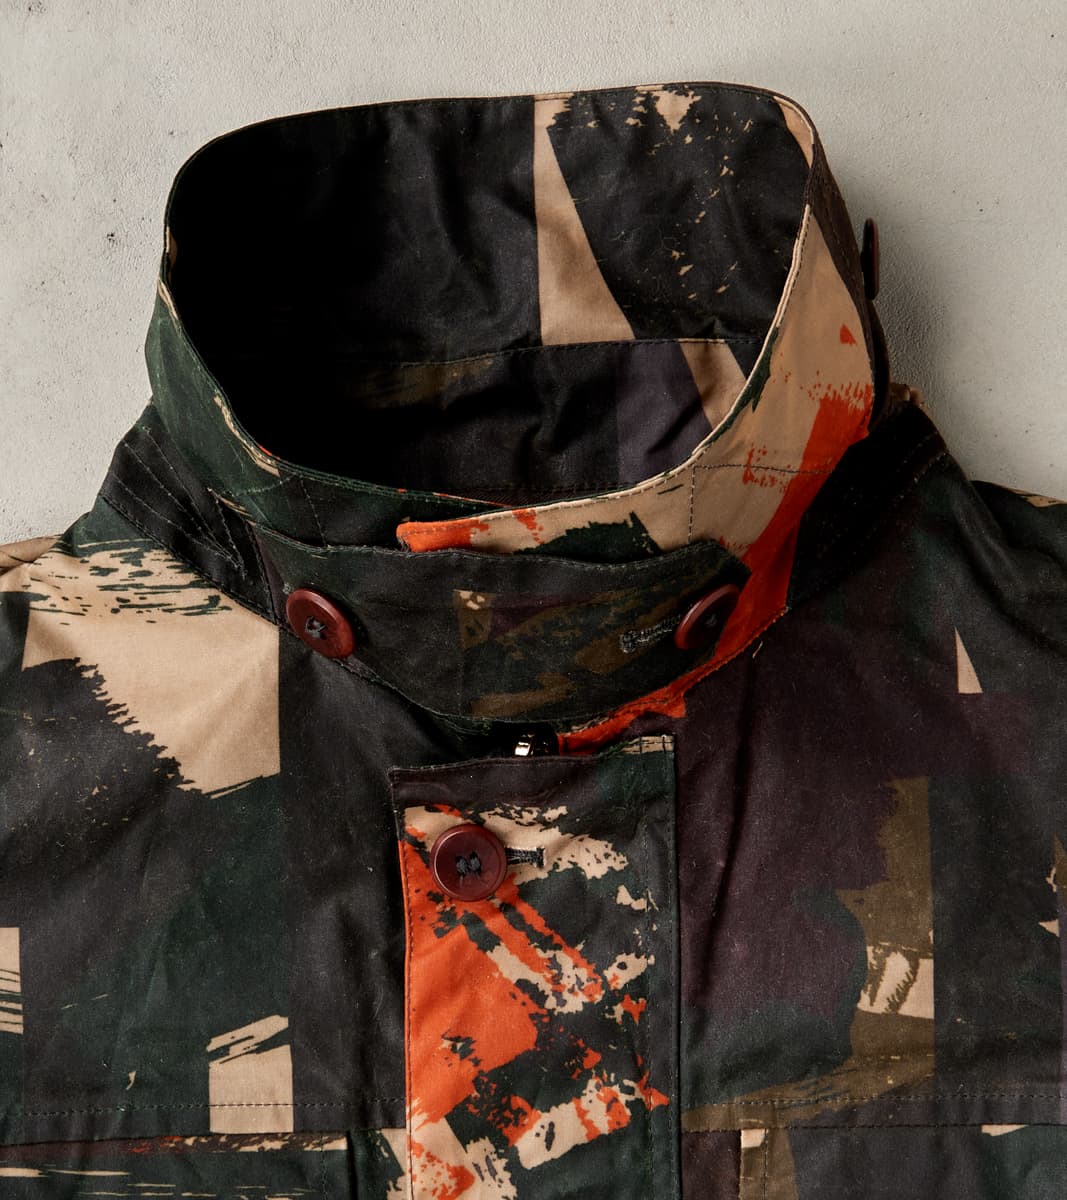 The Workers Club x DR Field Jacket - TWC Camouflage Waxed Canvas